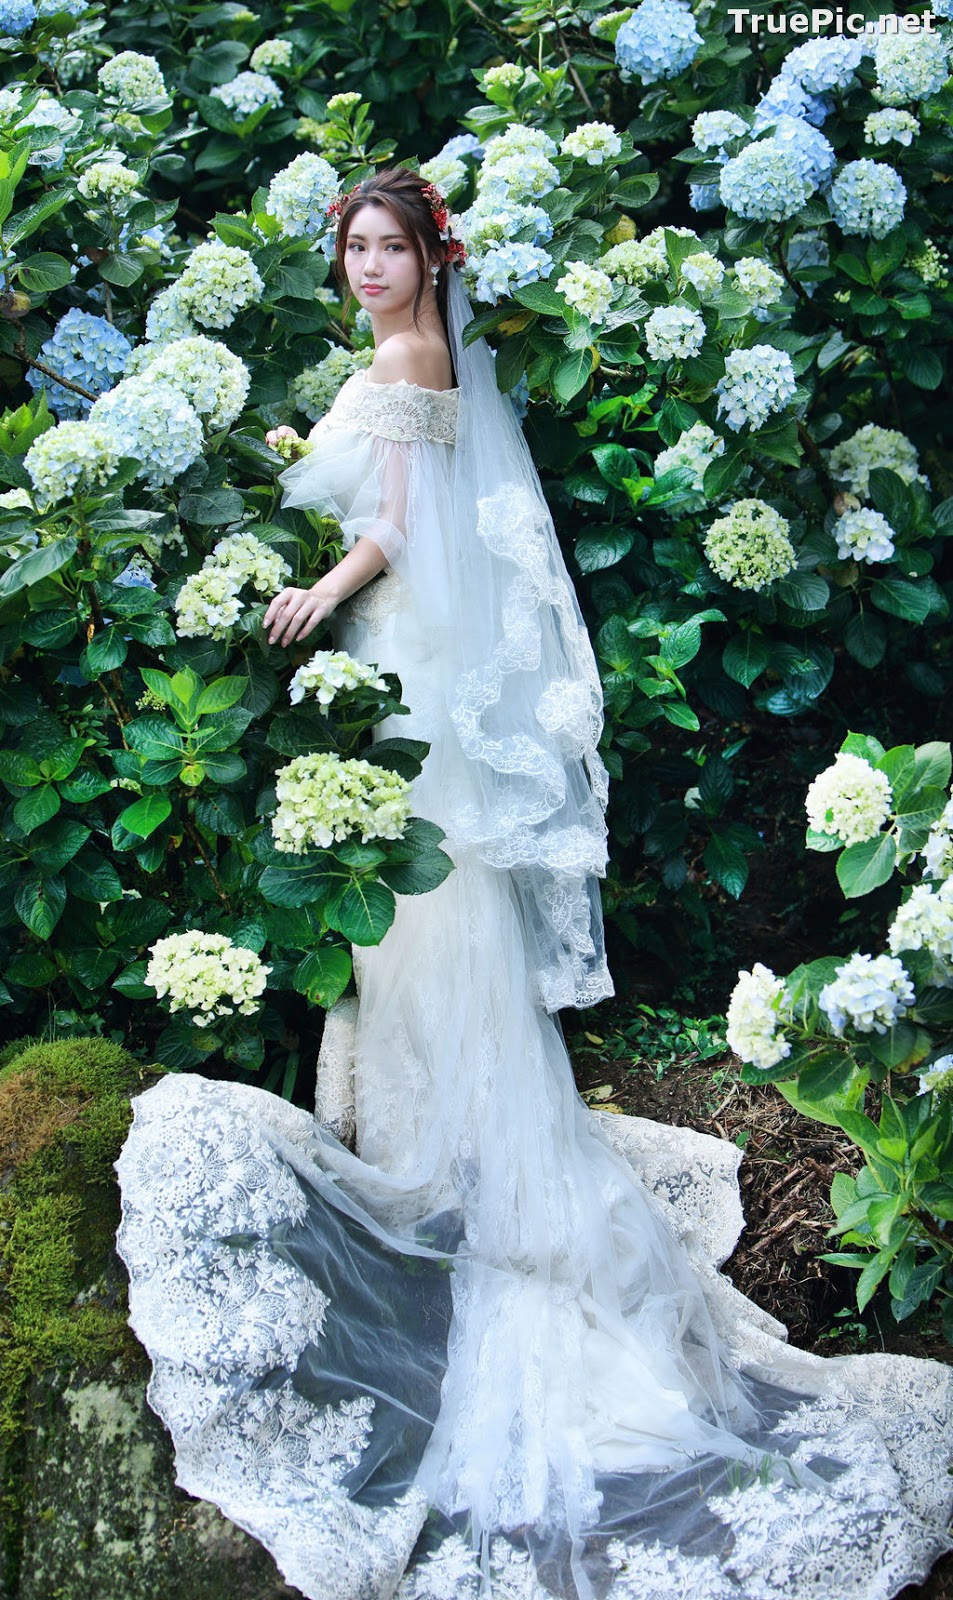 Image Taiwanese Model - 張倫甄 - Beautiful Bride and Hydrangea Flowers - TruePic.net - Picture-56